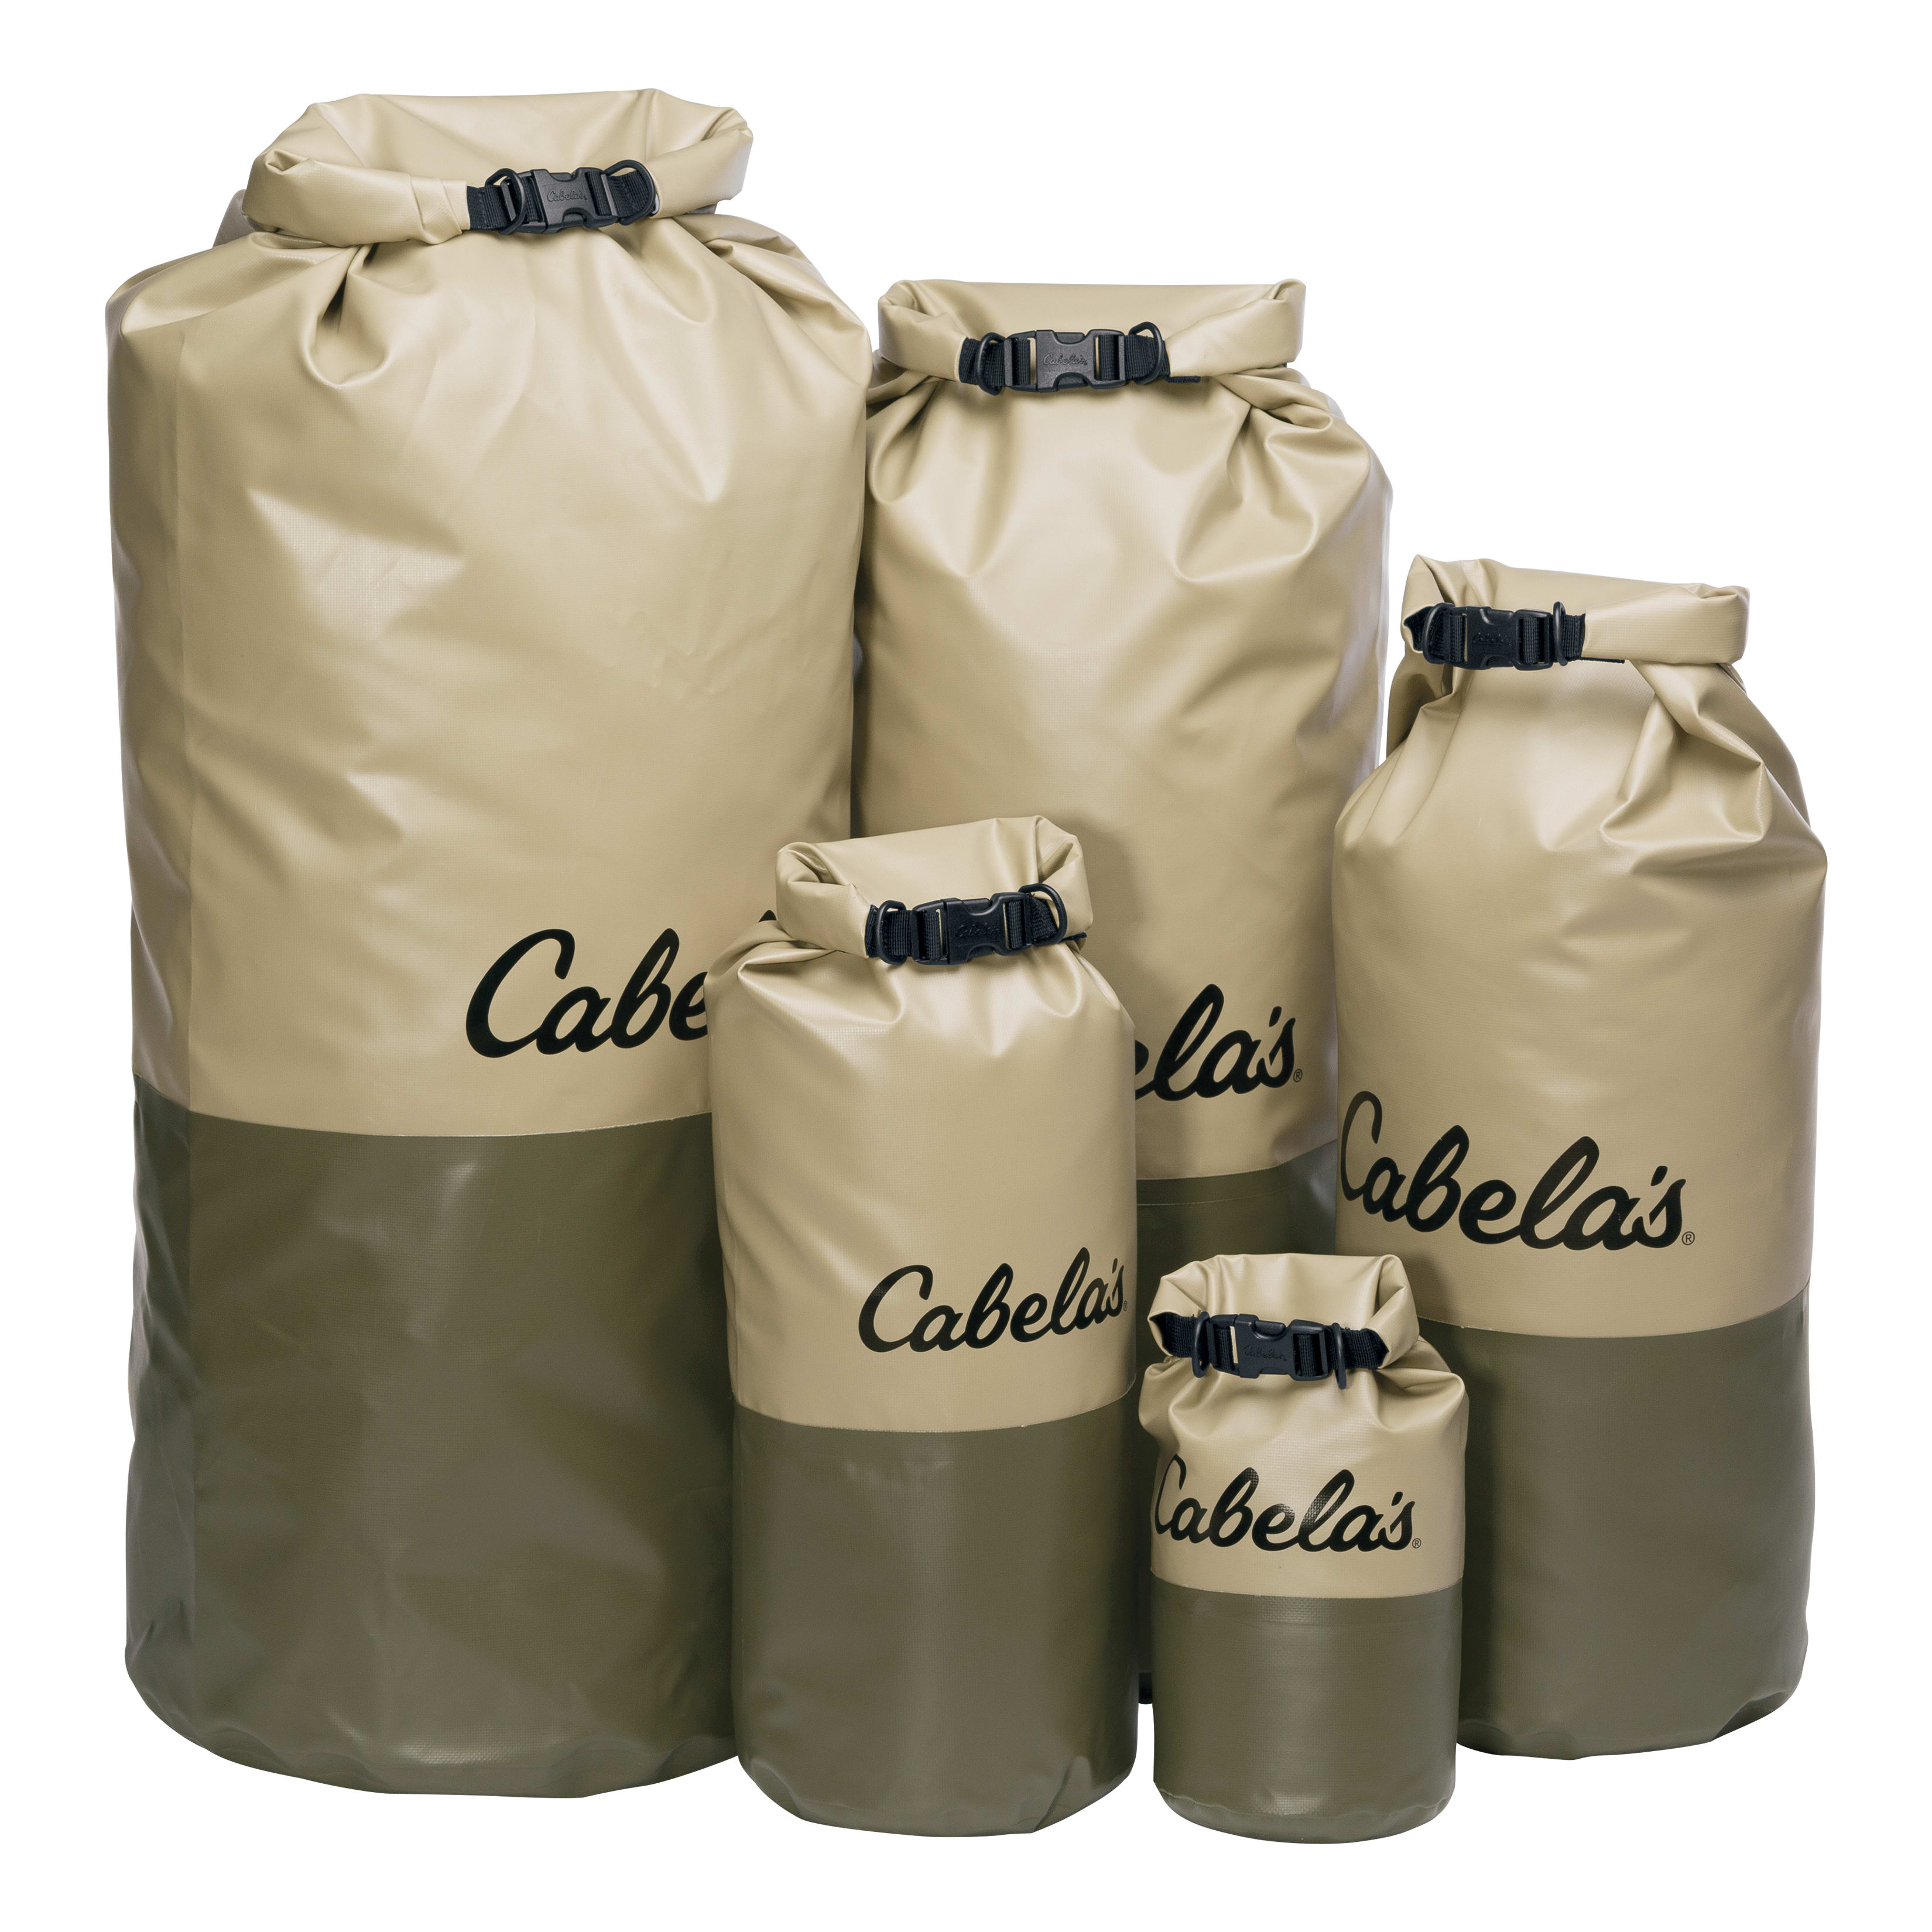 Picture for category Waterproof Bags & Containers